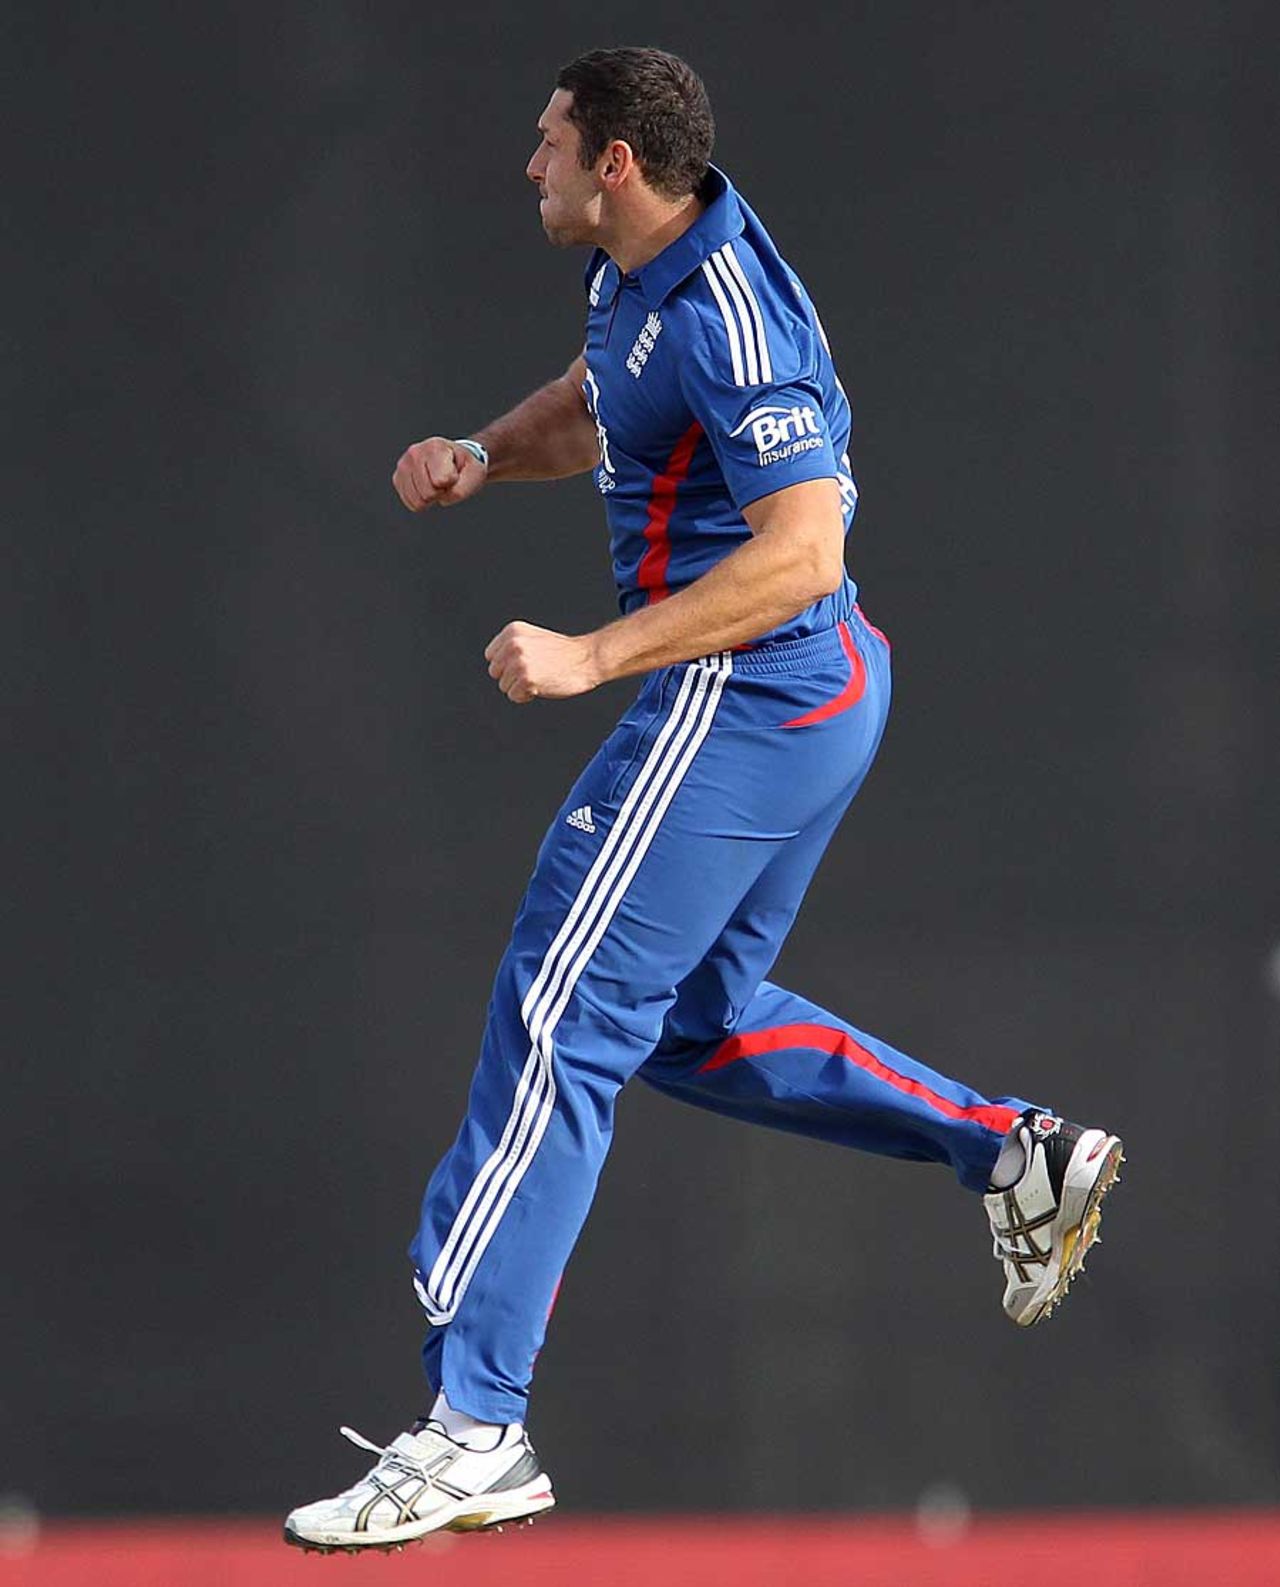 Tim Bresnan picked up two early wickets, India v England, 5th ODI, Dharamsala, January 27, 2013